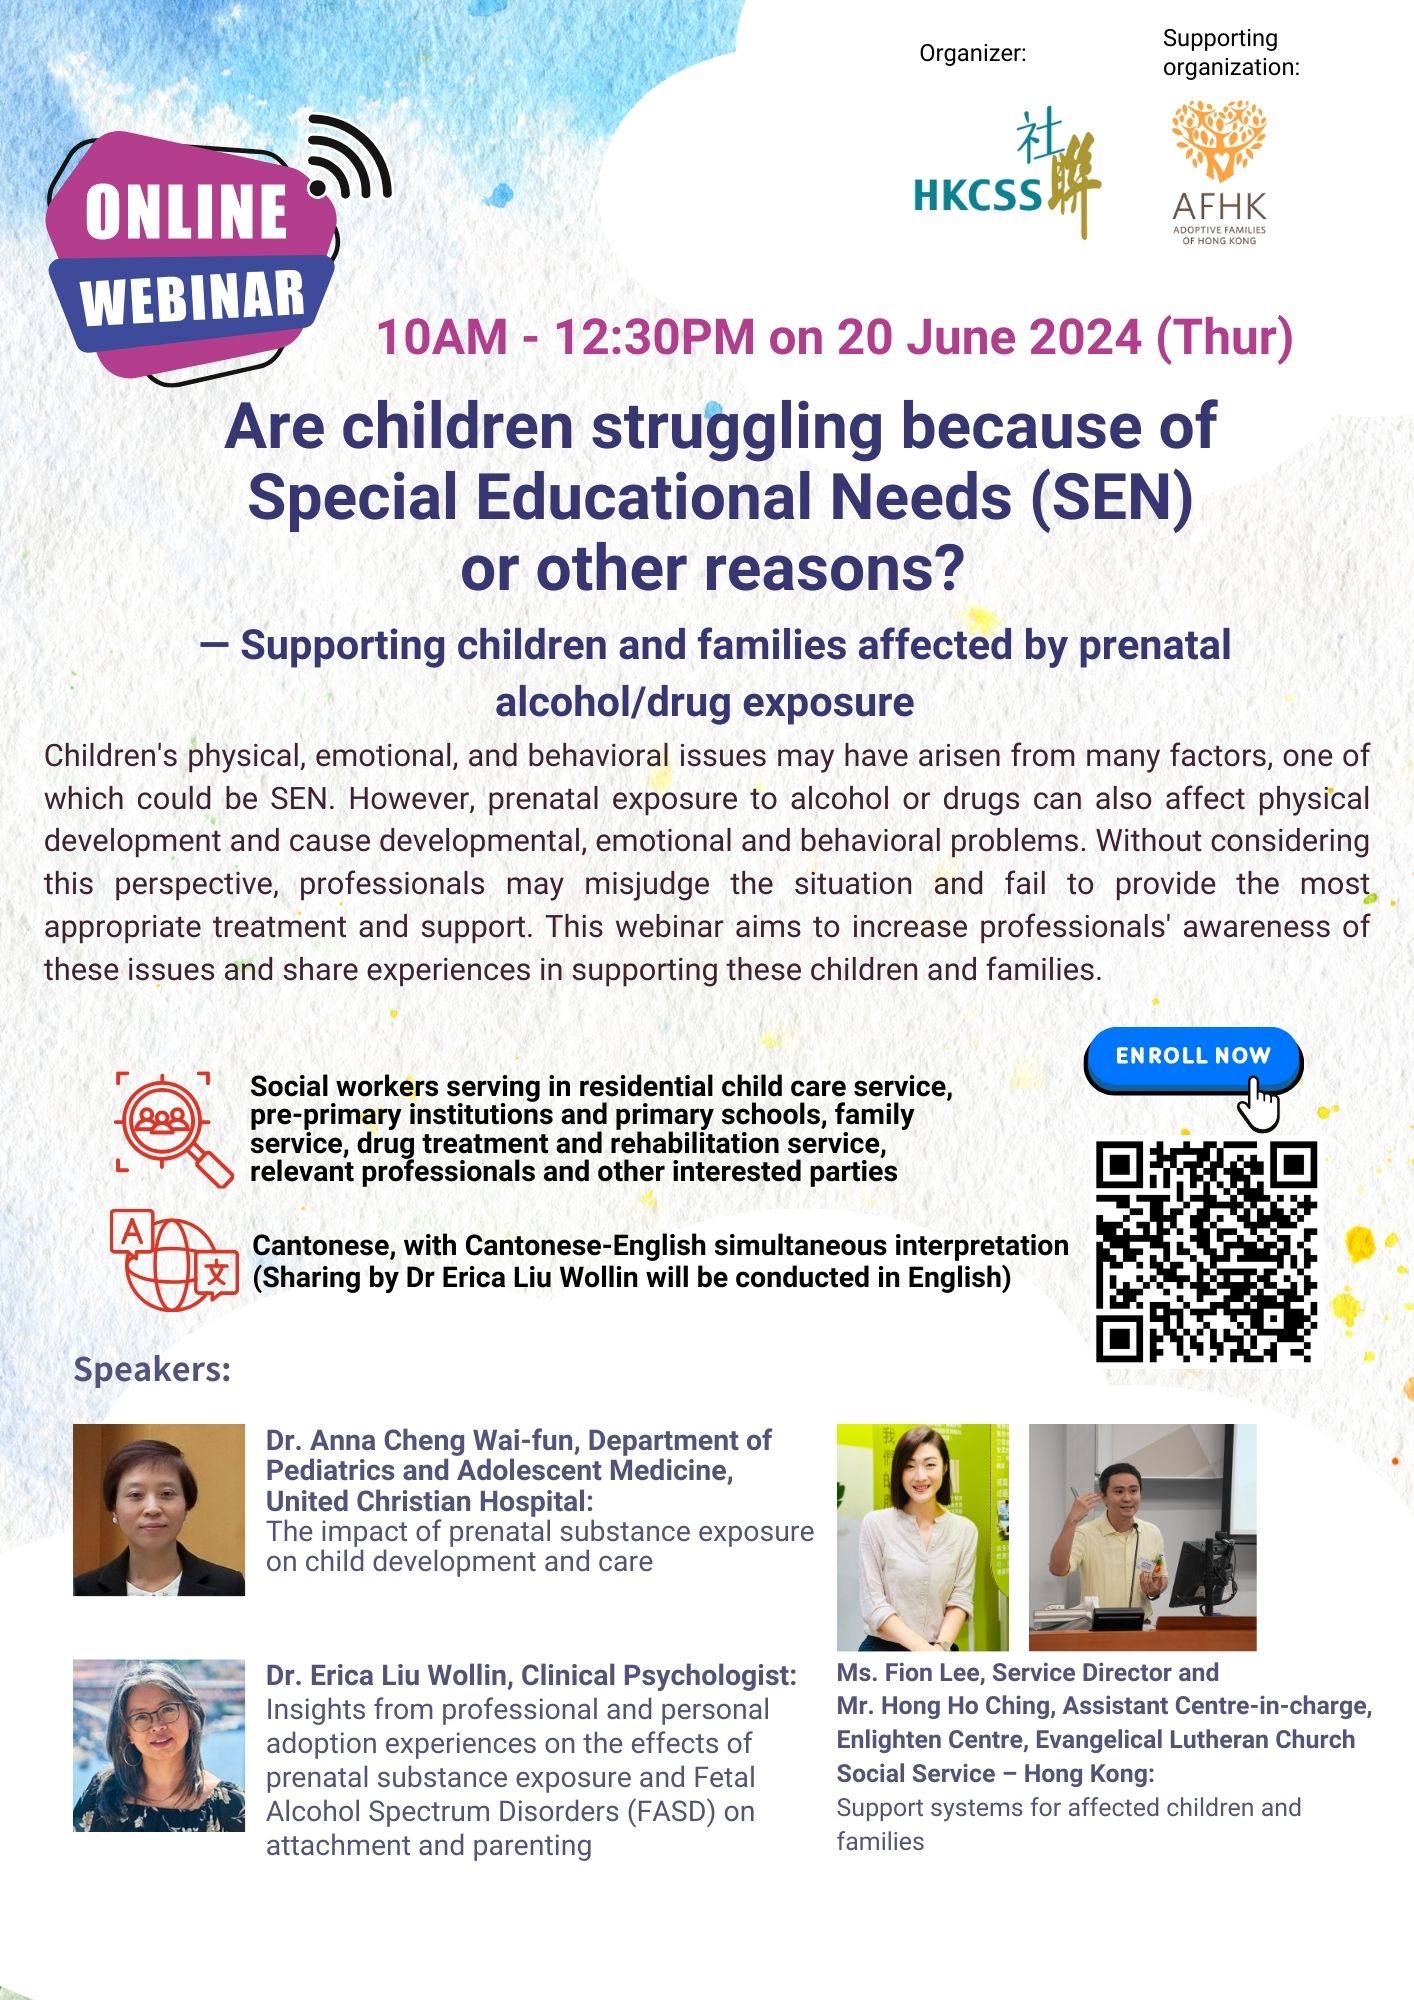 You are cordially invited to join the following online webinar: Are children struggling because of special educational needs (SEN) or other reasons? -- Supporting children and families affected by prenatal alcohol/ drug exposure Organizer: The Hong Kong Council of Social Service Supporting organization: Adoptive Families of Hong Kong Children's physical, emotional, and behavioral issues may have arisen from many factors, one of which could be SEN. However, prenatal exposure to alcohol or drugs can also affect physical development and cause developmental, emotional and behavioral problems. Without considering this perspective, professionals may misjudge the situation and fail to provide the most appropriate treatment and support. This webinar aims to increase professionals' awareness of these issues and share experiences in supporting these children and families. Content: 1. Dr. Anna Cheng Wai-fun from the Department of Pediatrics and Adolescent Medicine, United Christian Hospital: The impact of prenatal substance exposure on child development and care 2. Dr. Erica Liu Wollin, Clinical Psychologist: Insights from professional and personal adoption experiences on the effects of prenatal substance exposure and Fetal Alcohol Spectrum Disorders (FASD) on attachment and parenting 3. Ms. Fion Lee, Service Director and Mr. Hong Ho Ching, Assistant Centre-in-charge, Enlighten Centre, Evangelical Lutheran Church Social Service – Hong Kong: Support systems for affected children and families Date: June 20, 2024 (Thursday) Time: 10:00 AM - 12:30 PM Format: Webinar Target audience: Social workers serving in residential child care service, pre-primary institutions and primary schools, family service, drug treatment and rehabilitation service, relevant professionals and other interested parties Language: Cantonese, with Cantonese-English simultaneous interpretation (Sharing by Dr Erica Liu Wollin will be conducted in English)